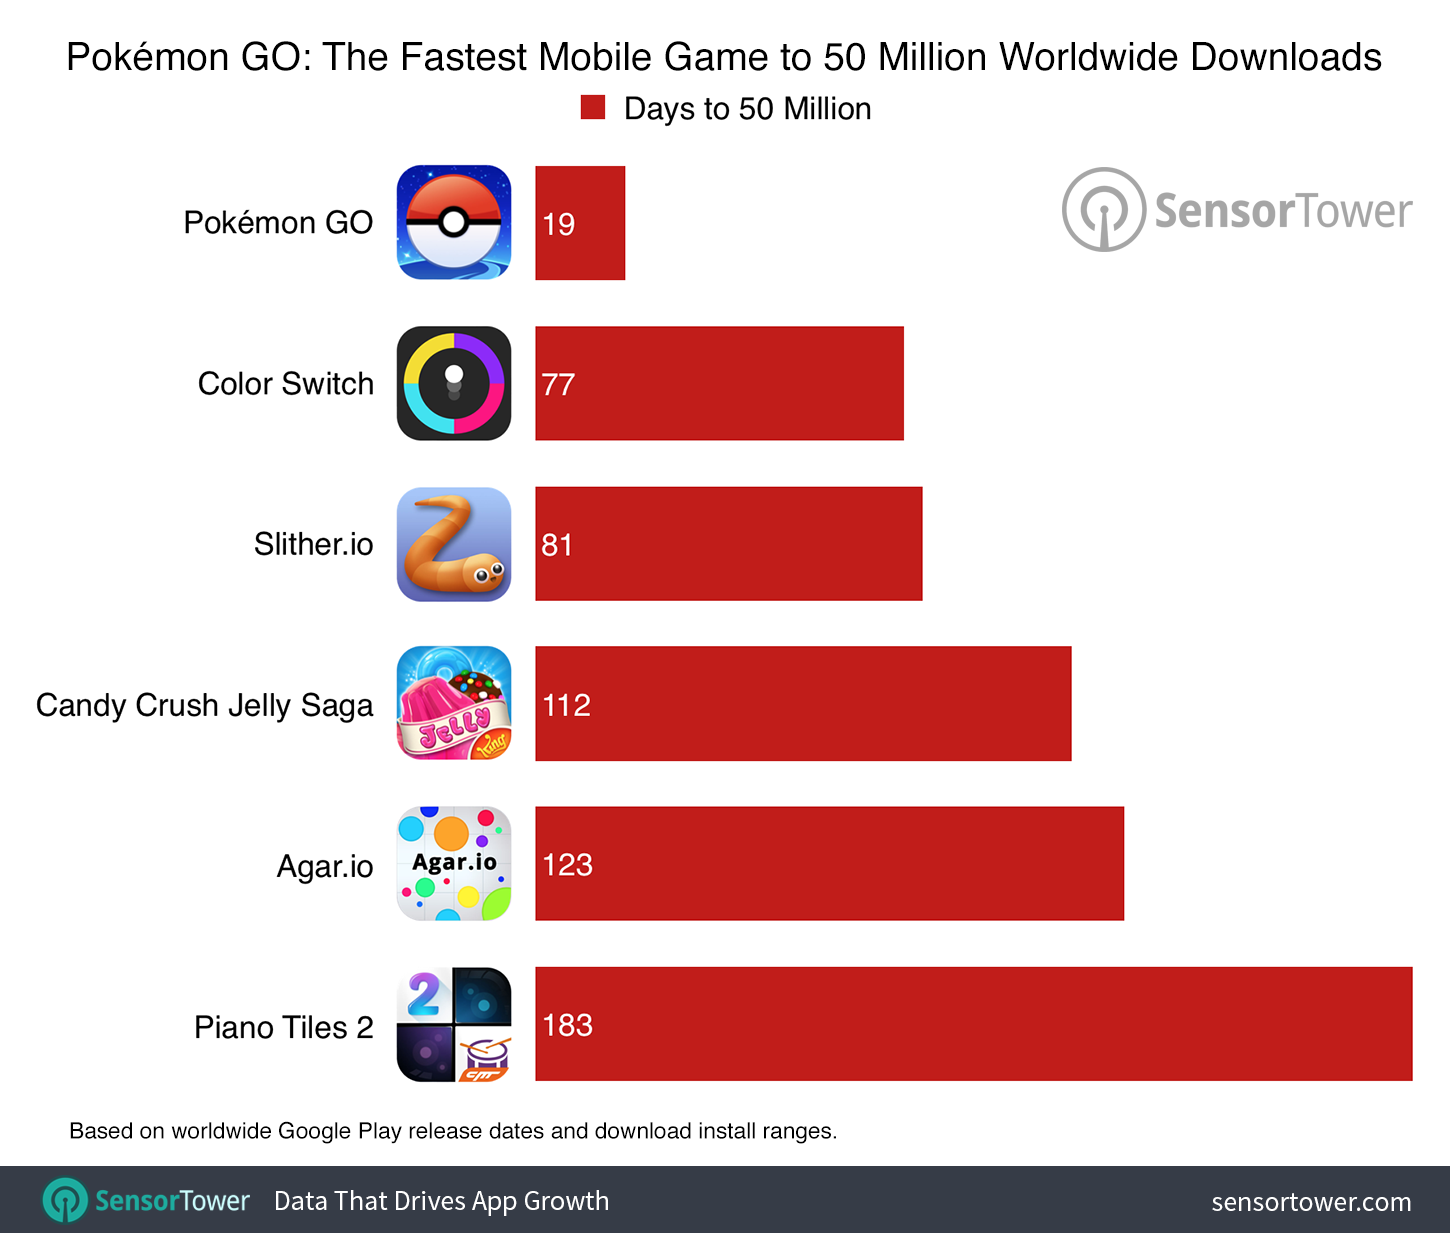 Pokemon Go continues to break records as it reaches 75 million downloads across Android and iOS